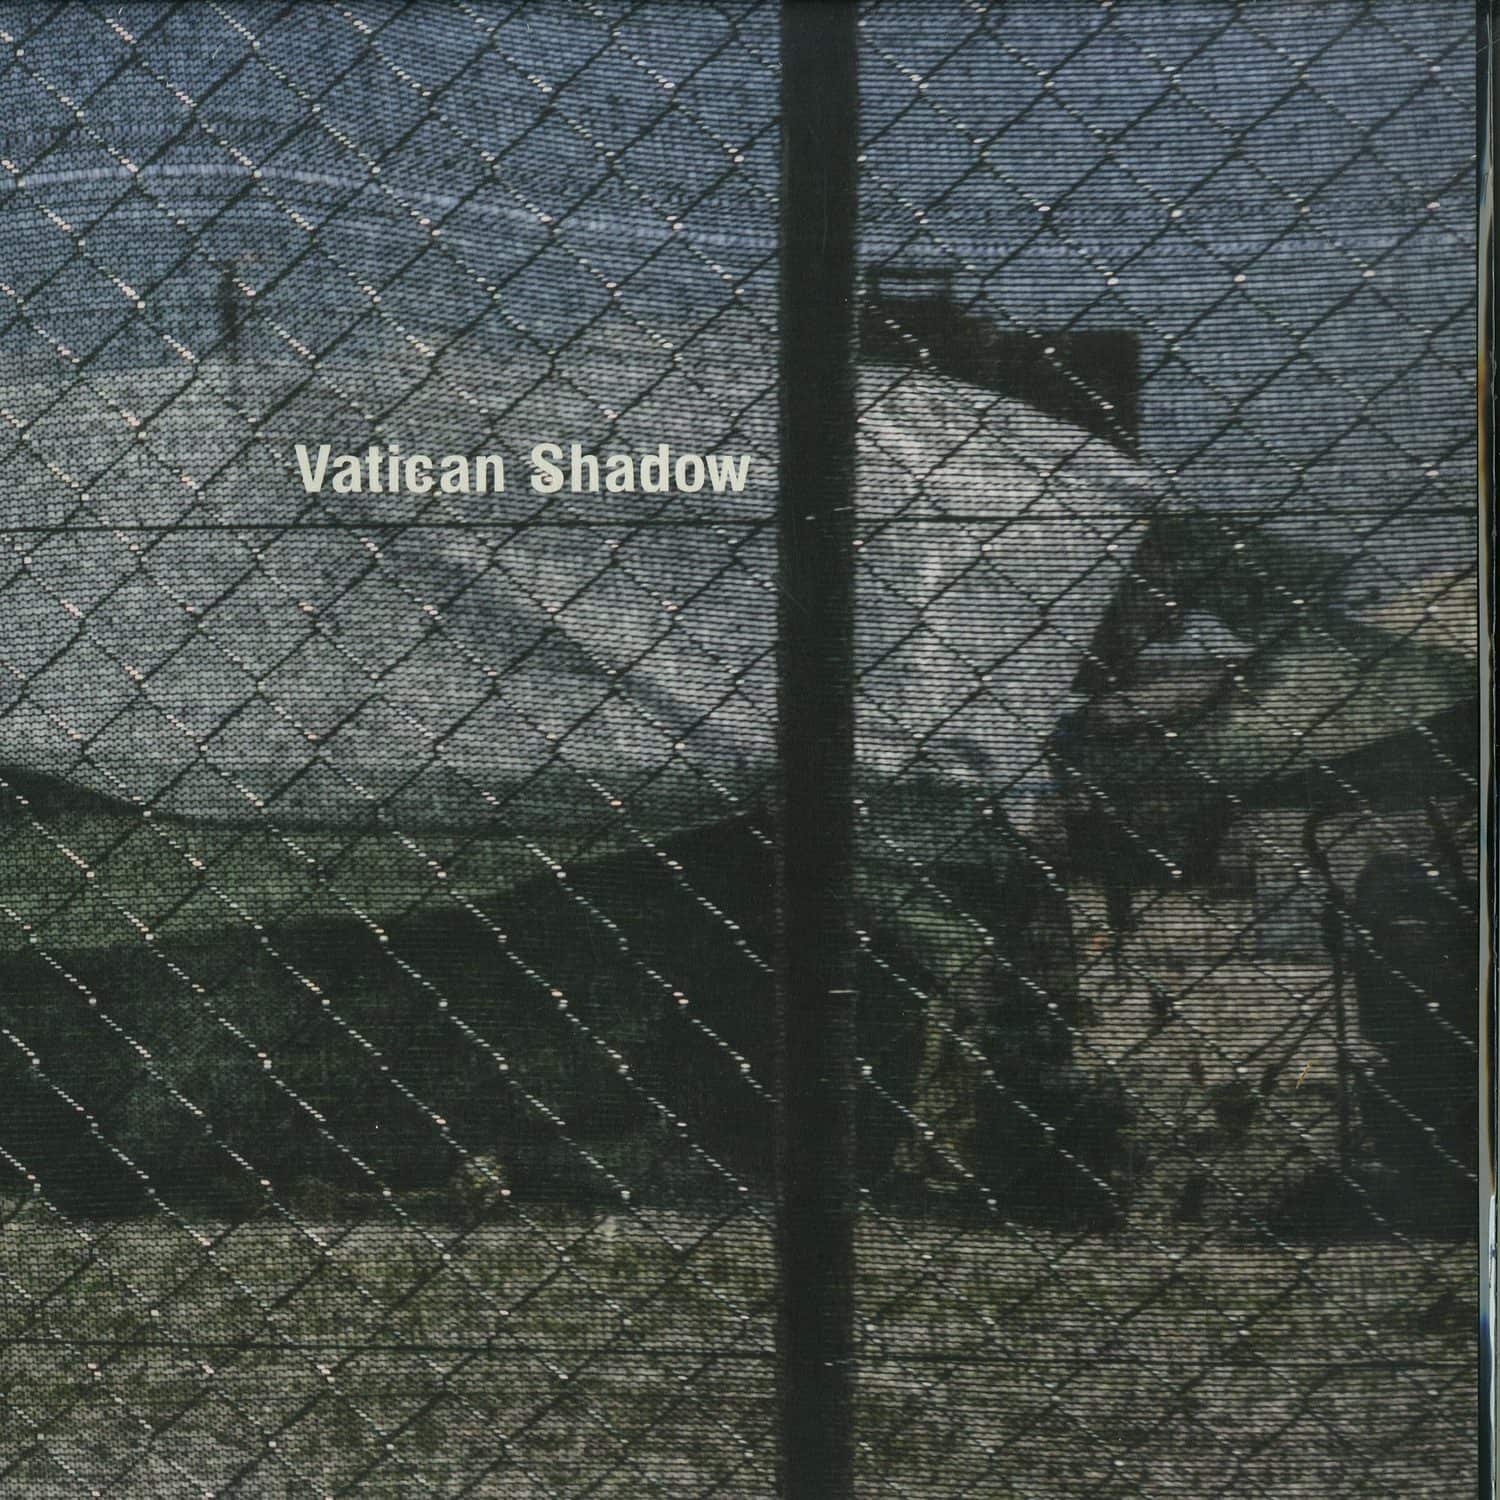 Vatican Shadow - RUBBISH OF THE FLOODWATERS